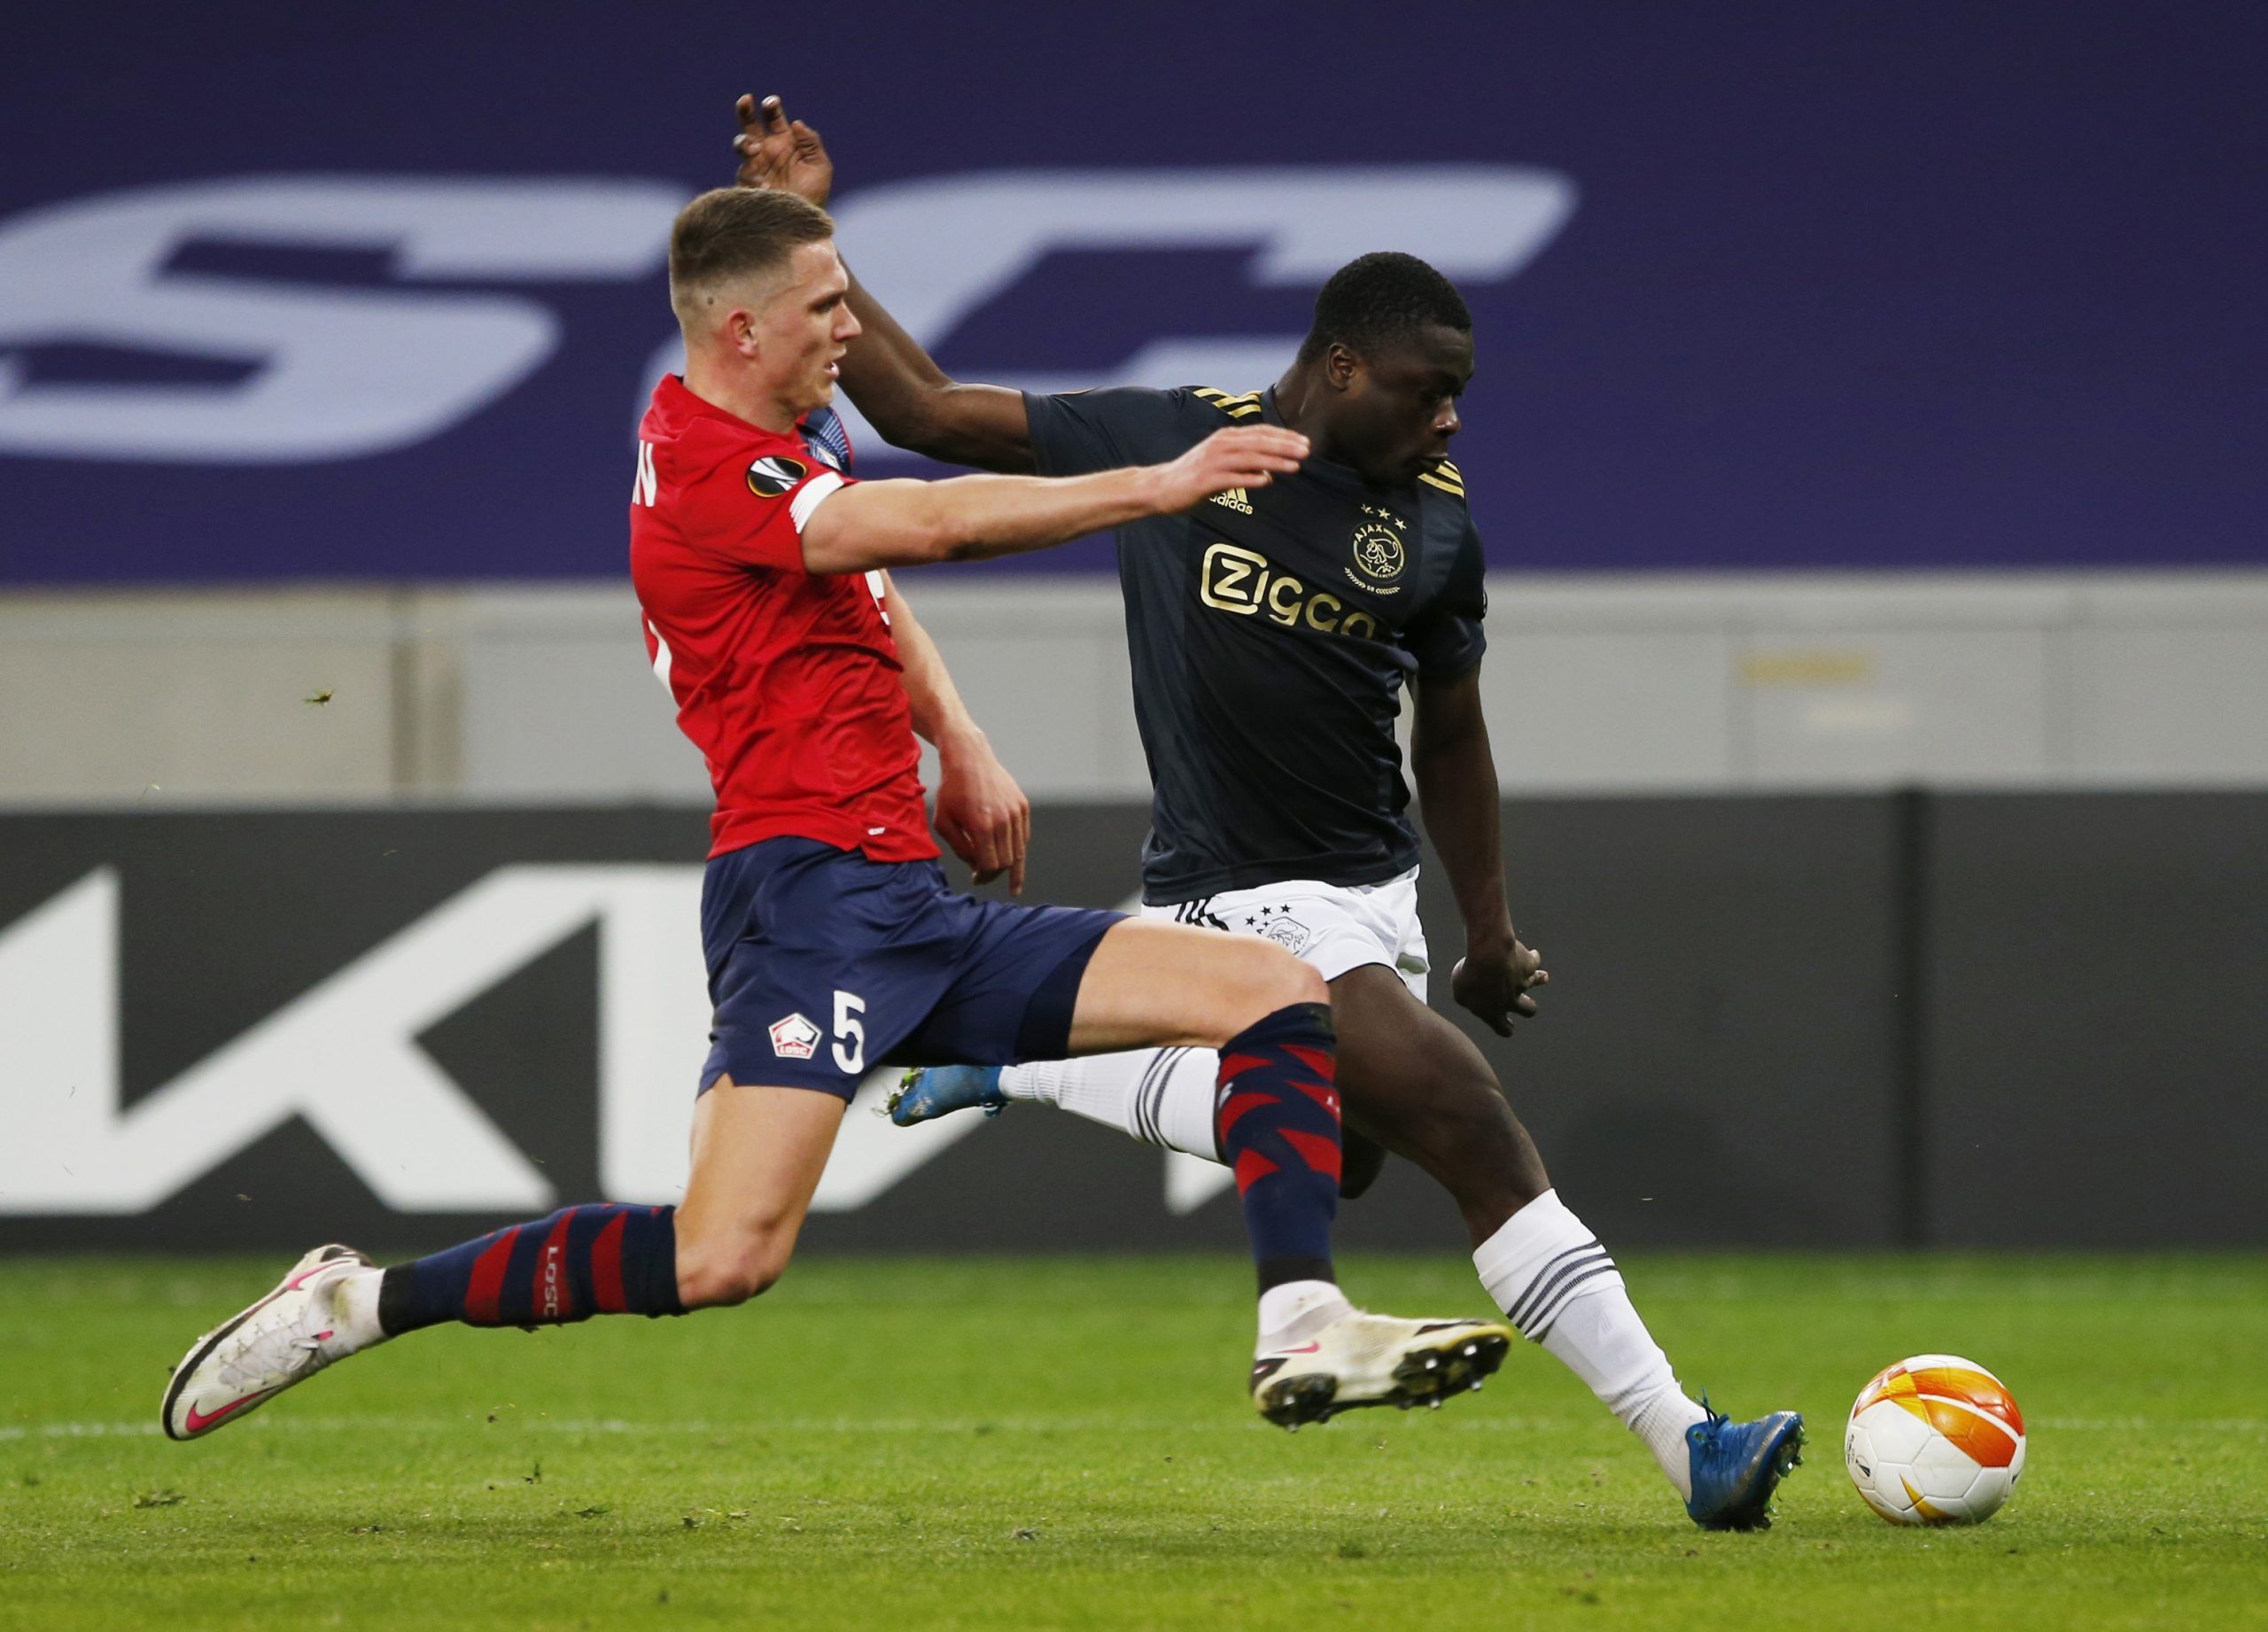 sven-botman-lille-ligue-1-manchester-united-premier-league-man-utd-transfer-newsSoccer Football - Europa League - Round of 32 First Leg - Lille v Ajax Amsterdam - Stade Pierre-Mauroy, Lille, France - February 18, 2021 Ajax's Brian Brobbey in action with Lille's Sven Botman REUTERS/Pascal Rossignol